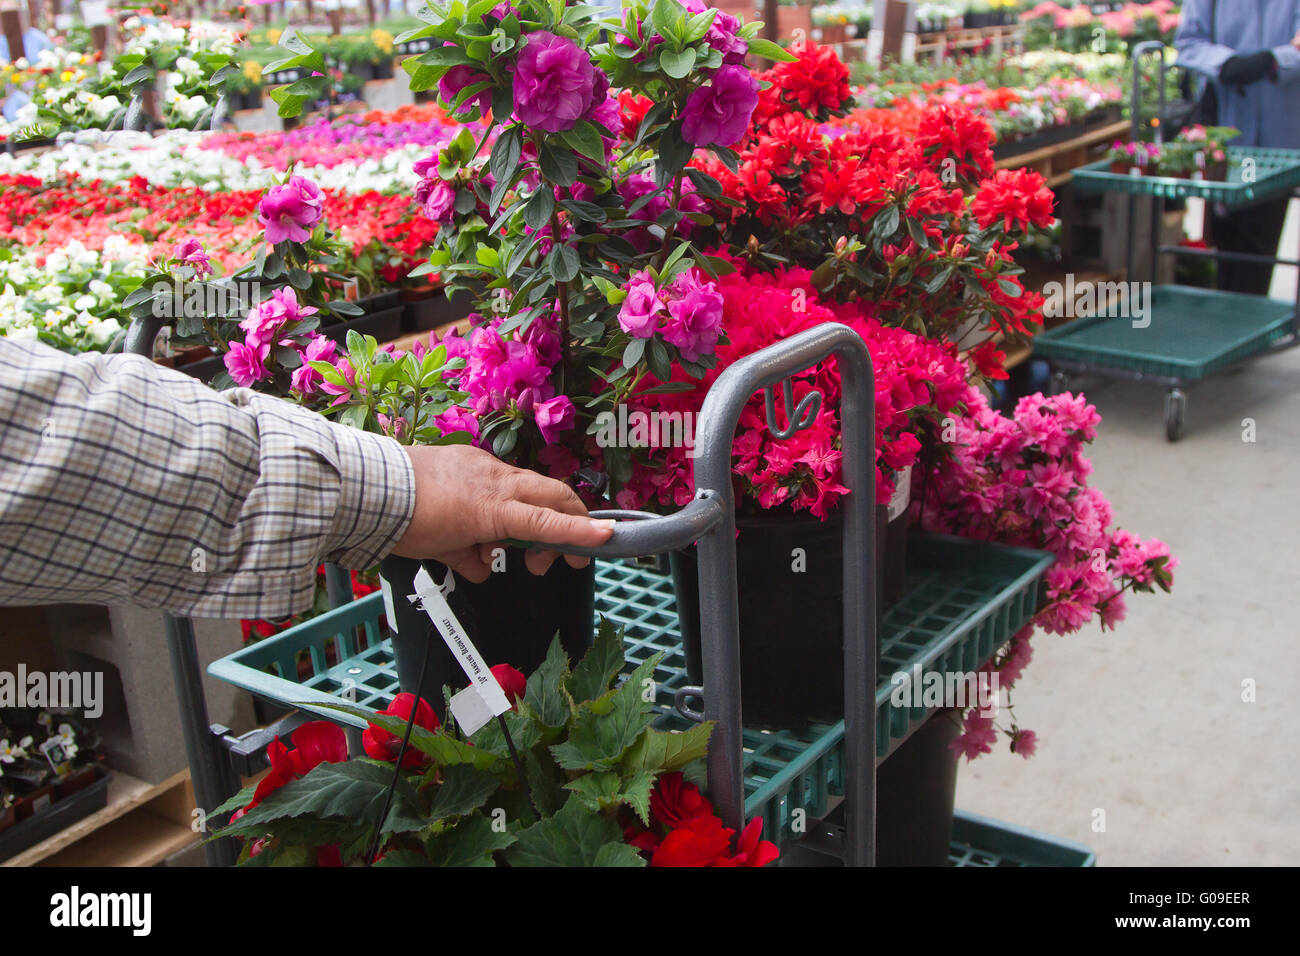 Customer's hand selecting annual flowers in a retail nursery. Stock Photo